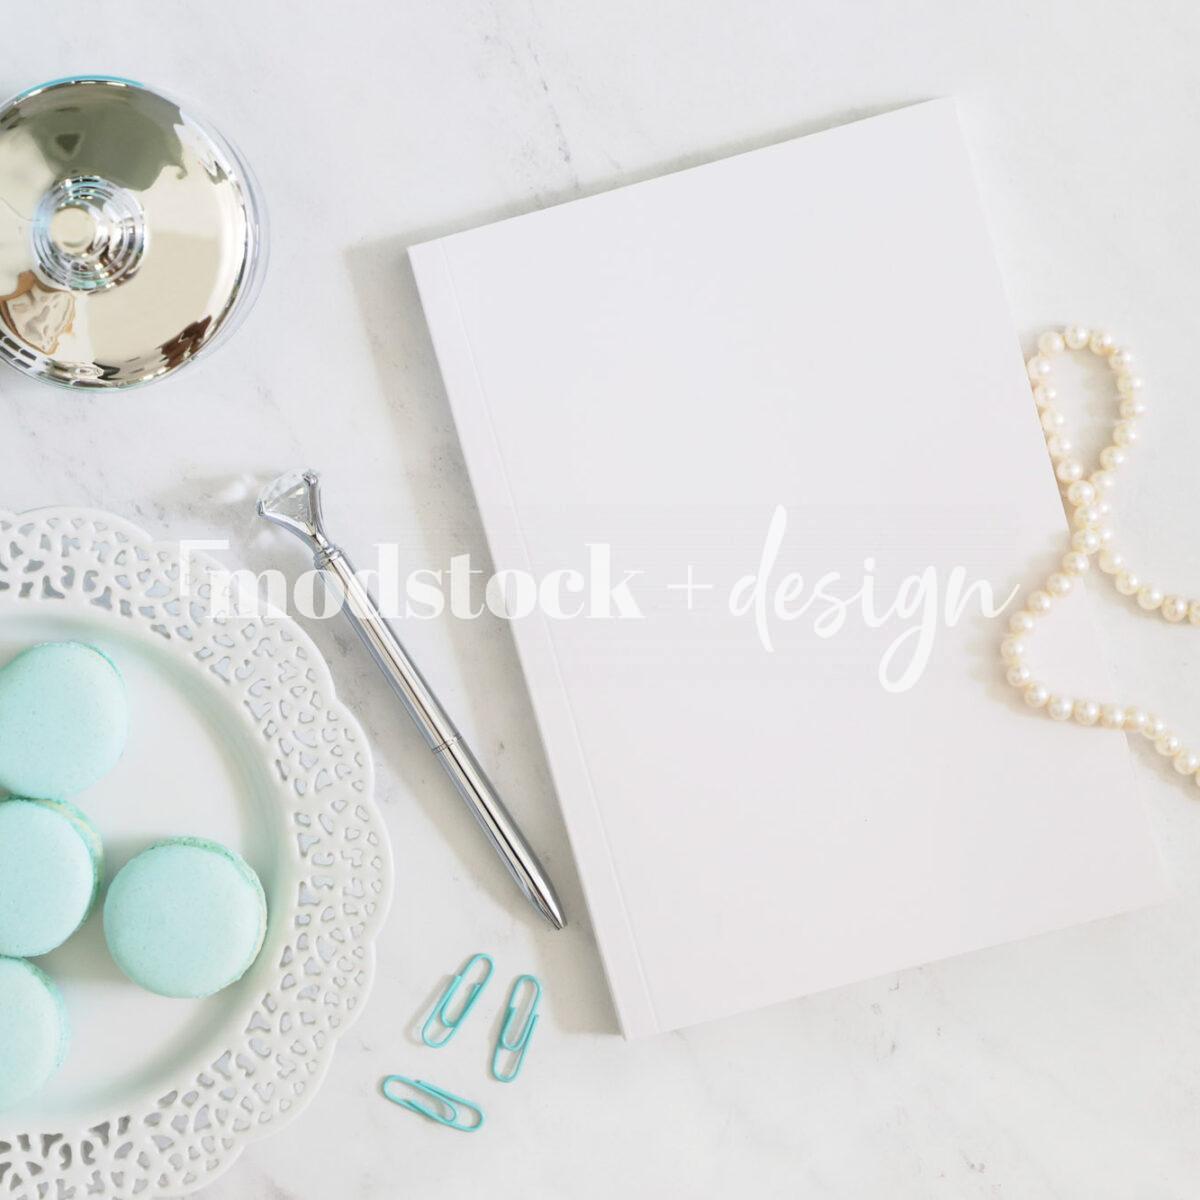 Modstock Luxe Teal Workspace - Silver 13